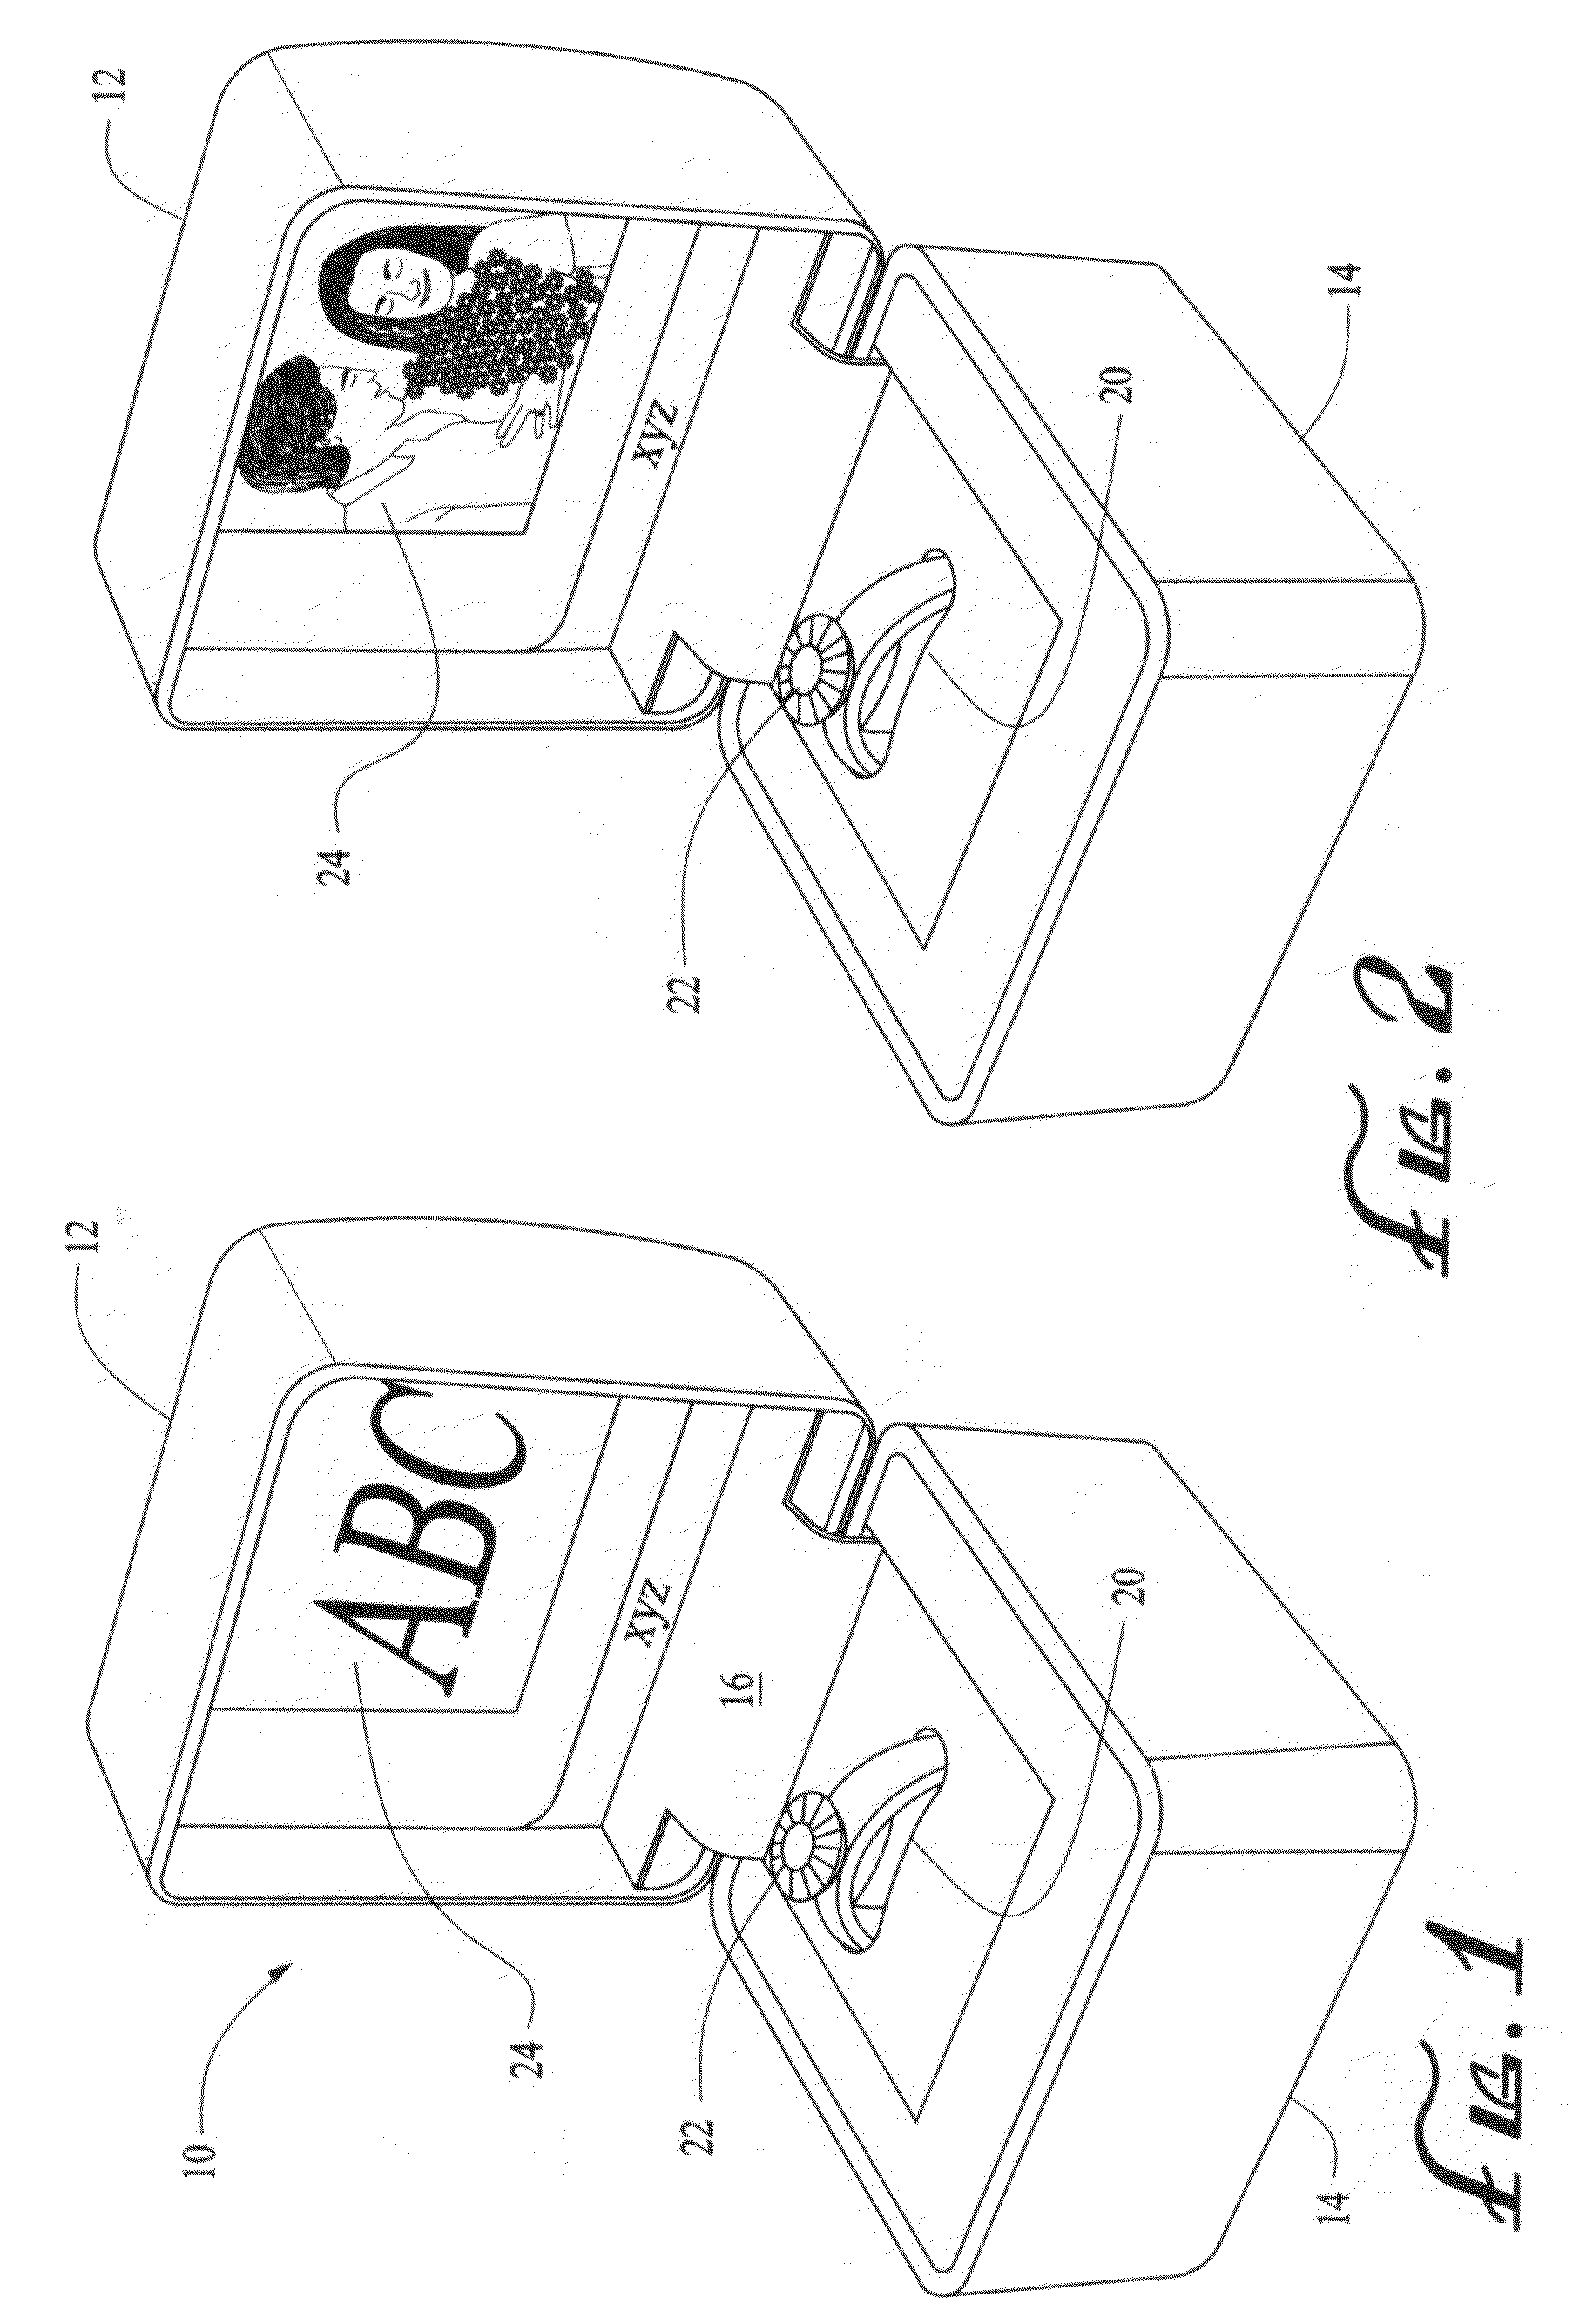 Jewelry box with electronic display apparatus